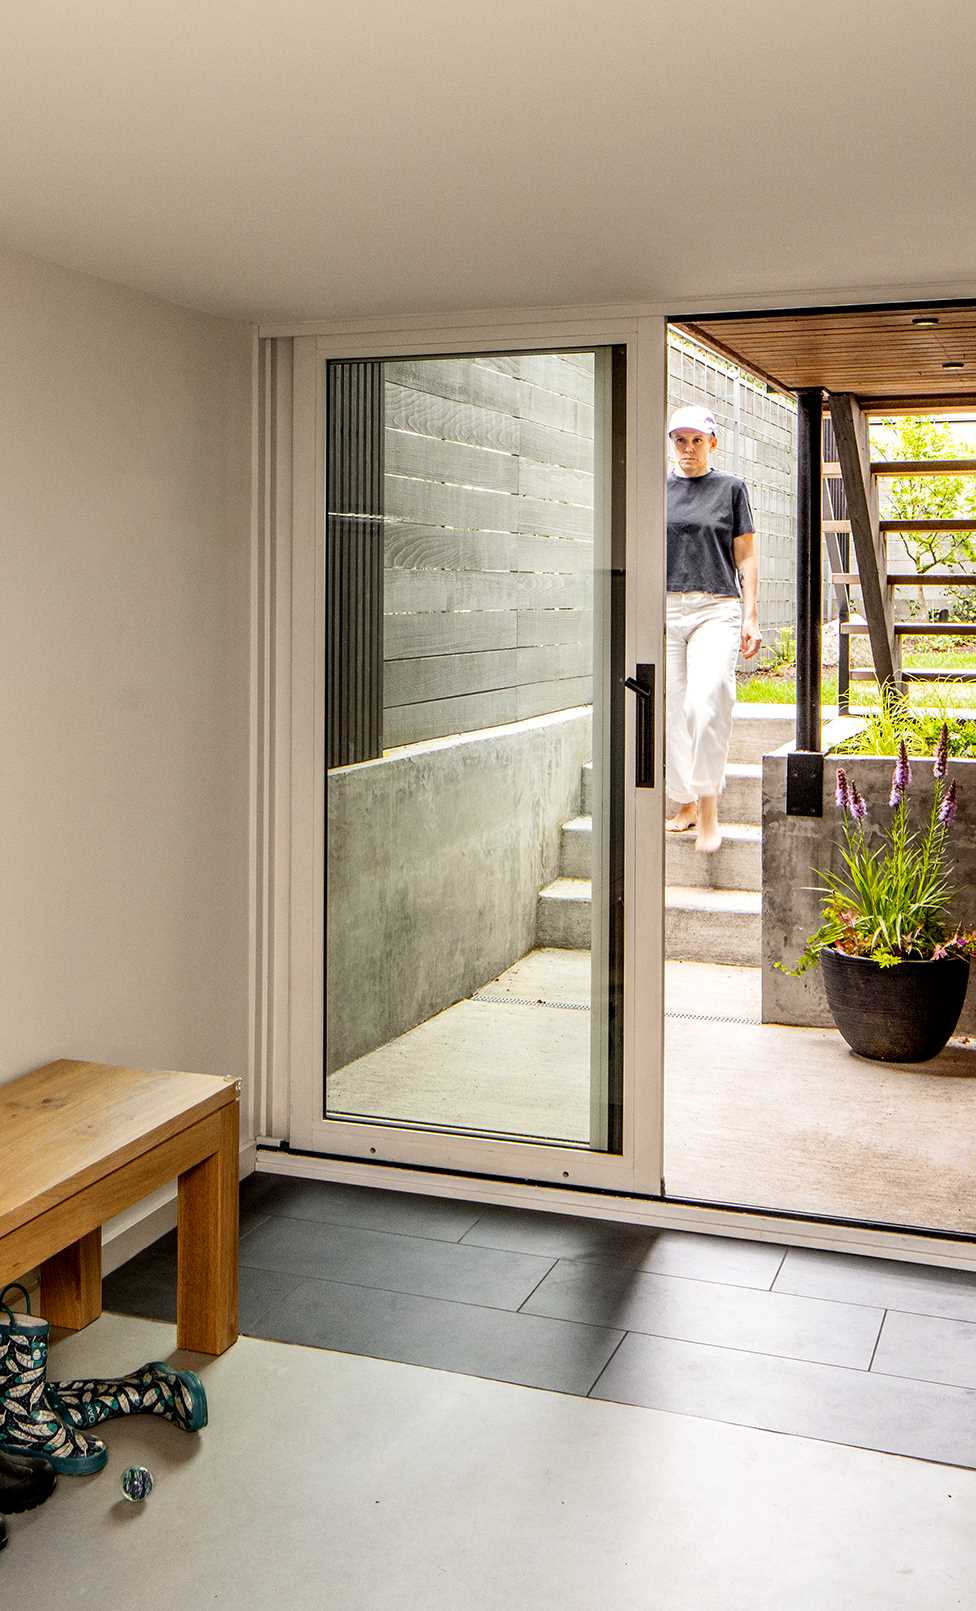 A remodeled basement includes a door to connect to the backyard.